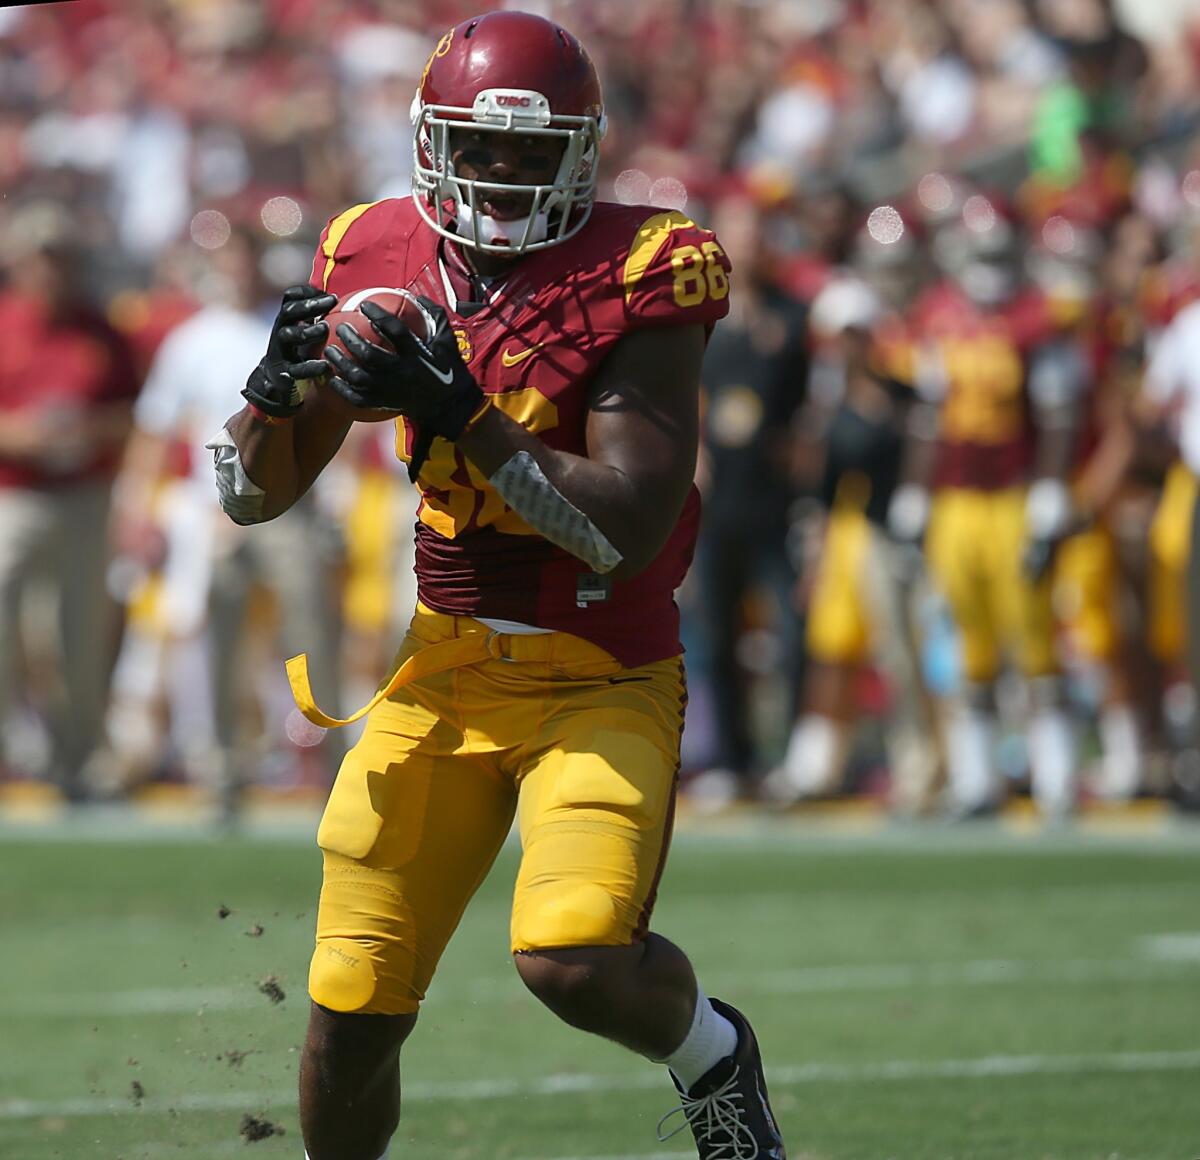 USC tight end Xavier Grimble is not expected to play Saturday against Utah because of injury.